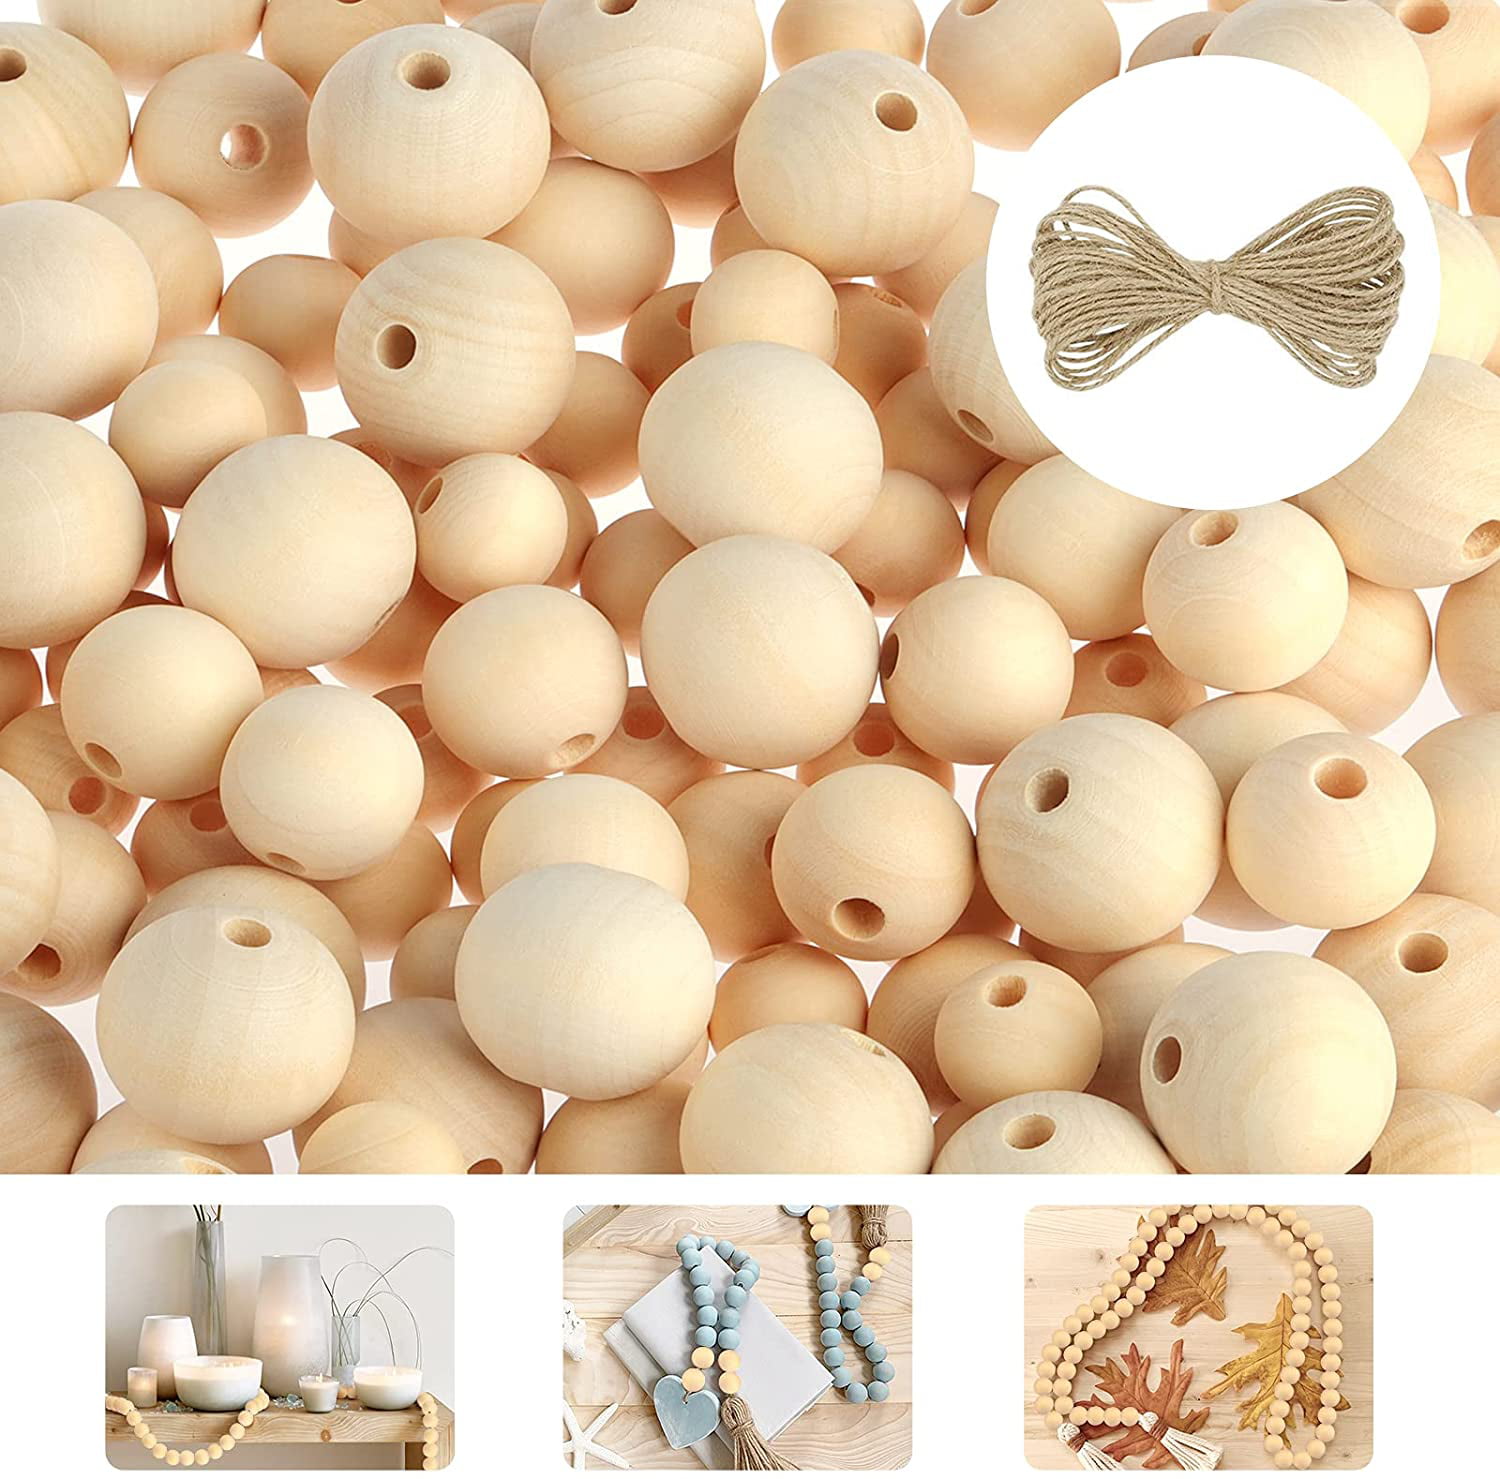 Round Loose Beads Princess pattern For jewelry making Spacer Wood Beads 20MM